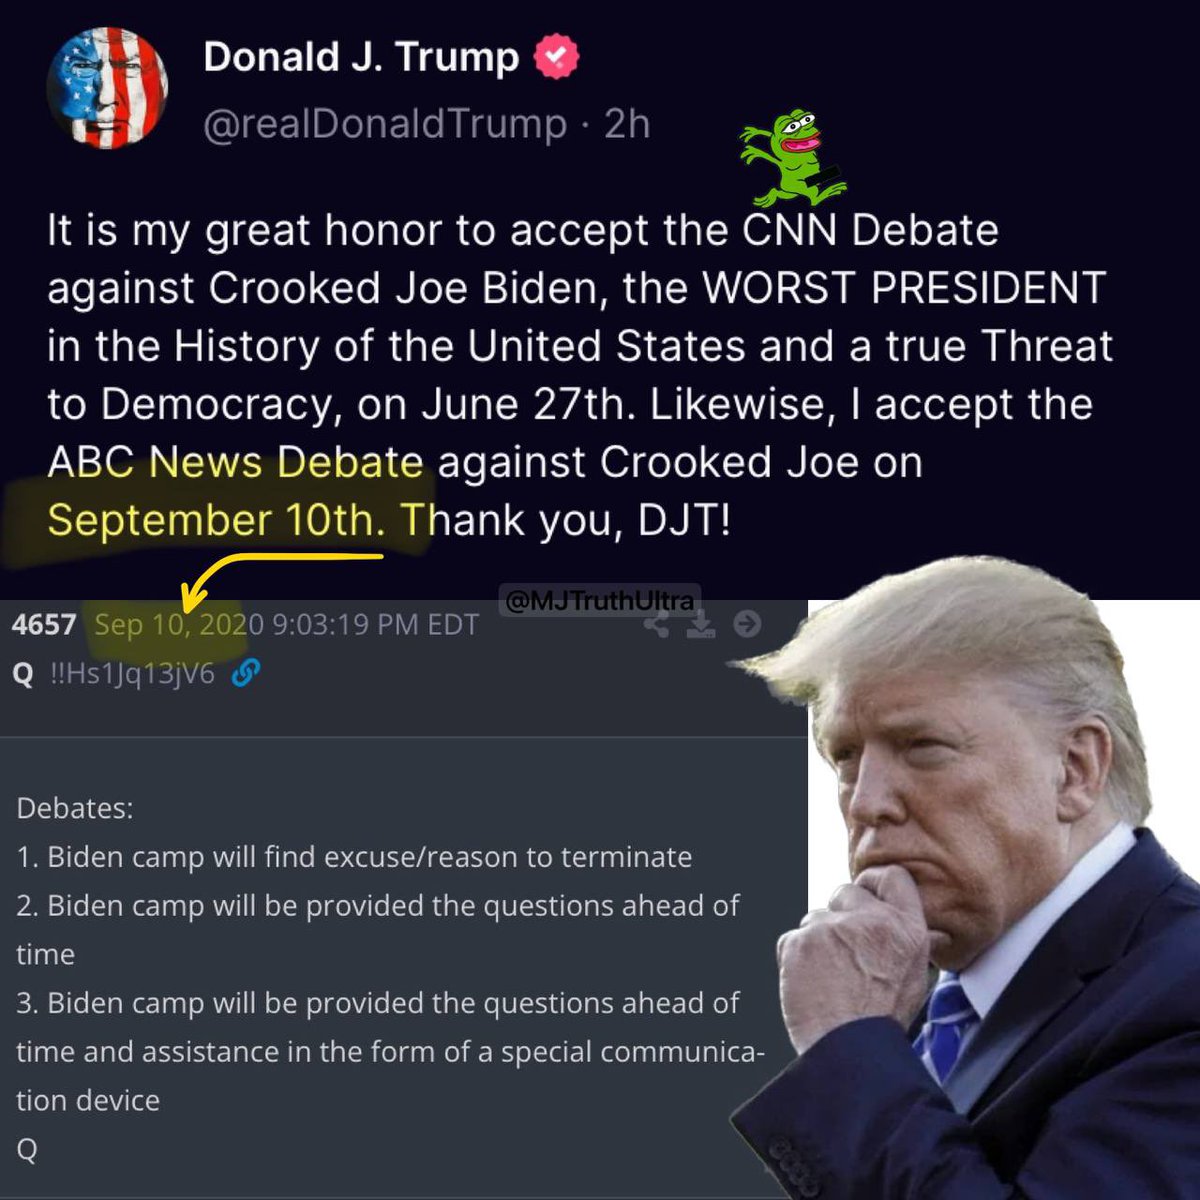 Very Interesting Coincidence.. • Trump and Biden will Debate on Sept 10 • Sept 10, 2020 Q Delta talks about none other than…. Debates lol 1. Biden camp will find excuse/reason to terminate 2. Biden camp will be provided the questions ahead of time 3. Biden camp will be